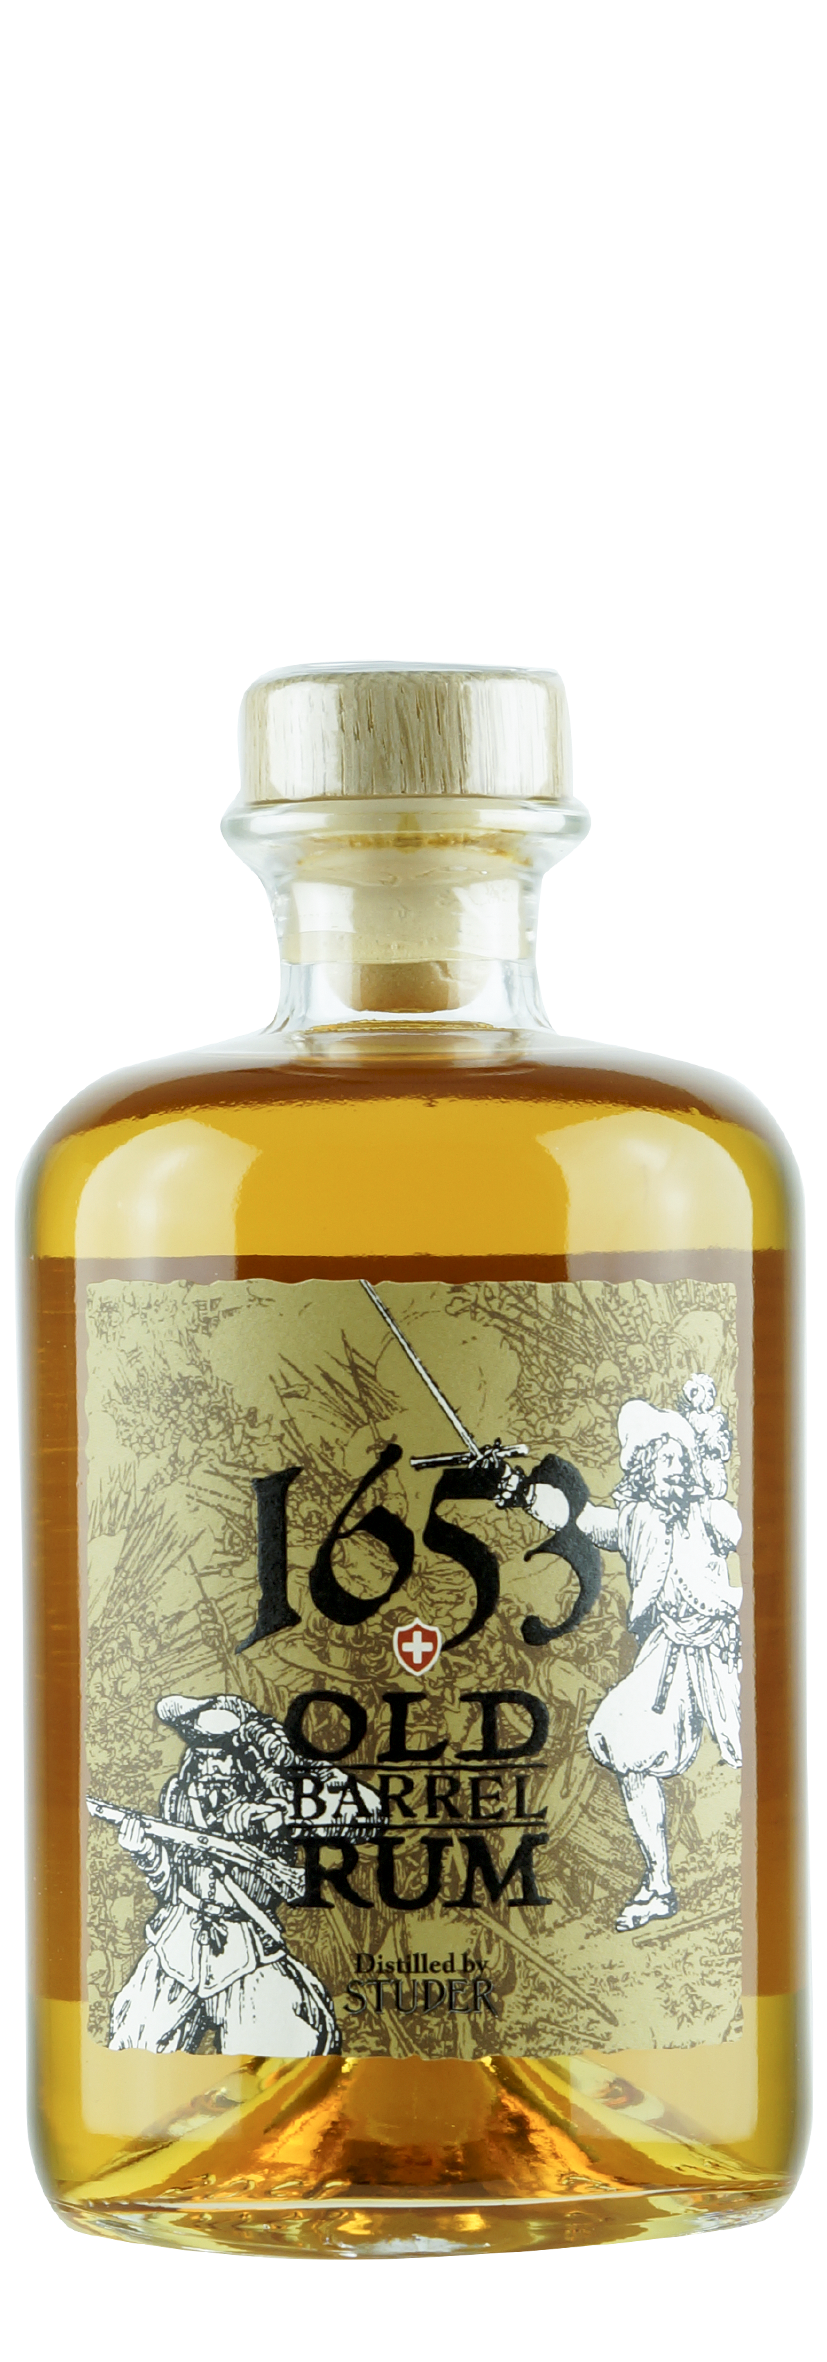 1653 Old Barrel Rum, 10 Y.O., Cask No. 12 unfiltred, unsweetened 0